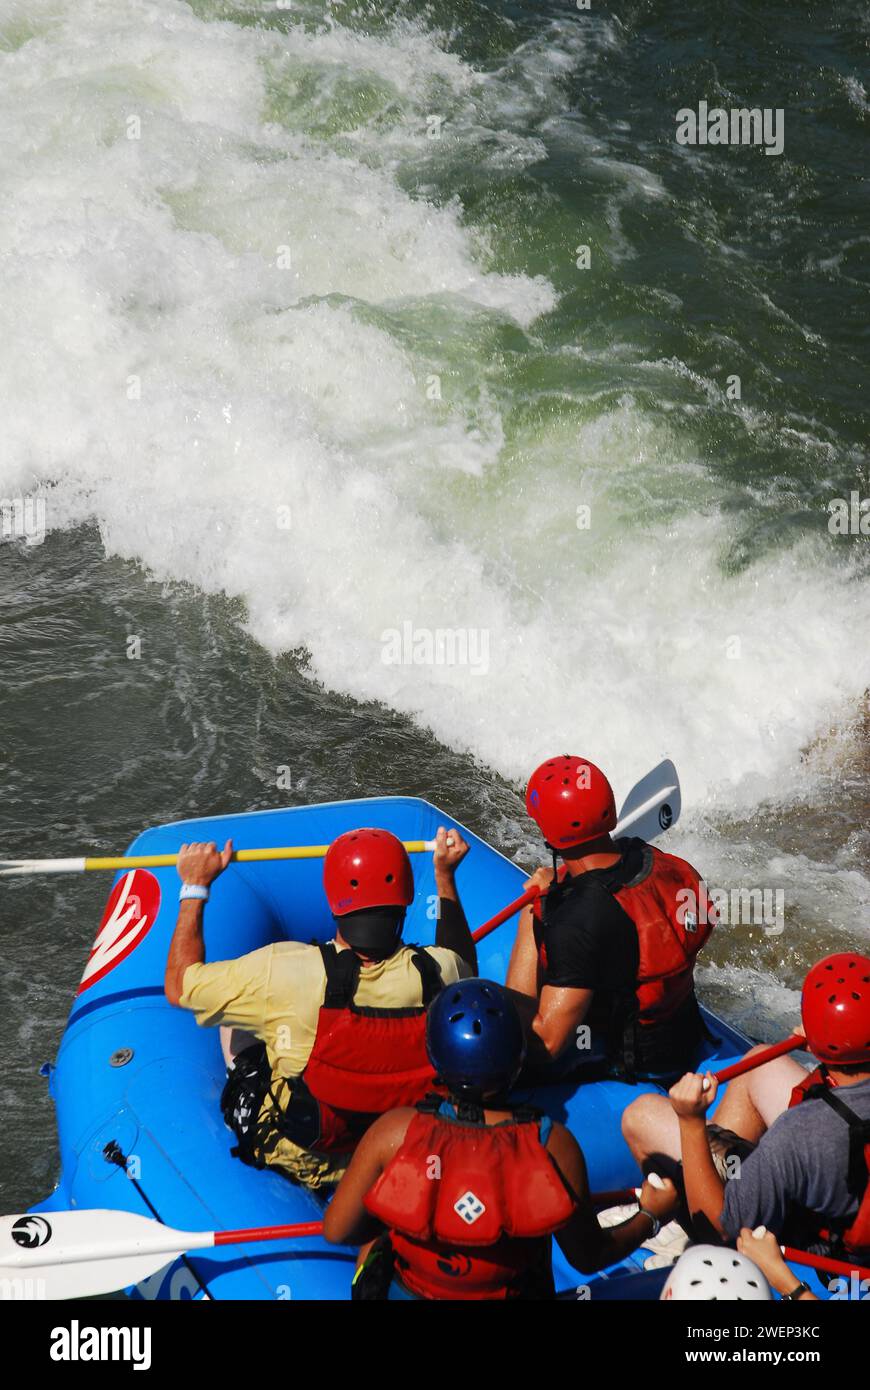 A group of adventure seekers prepare themselves for a drop into the rapids at the Whitewater Rafting Center in Charlotte, North Carolina Stock Photo